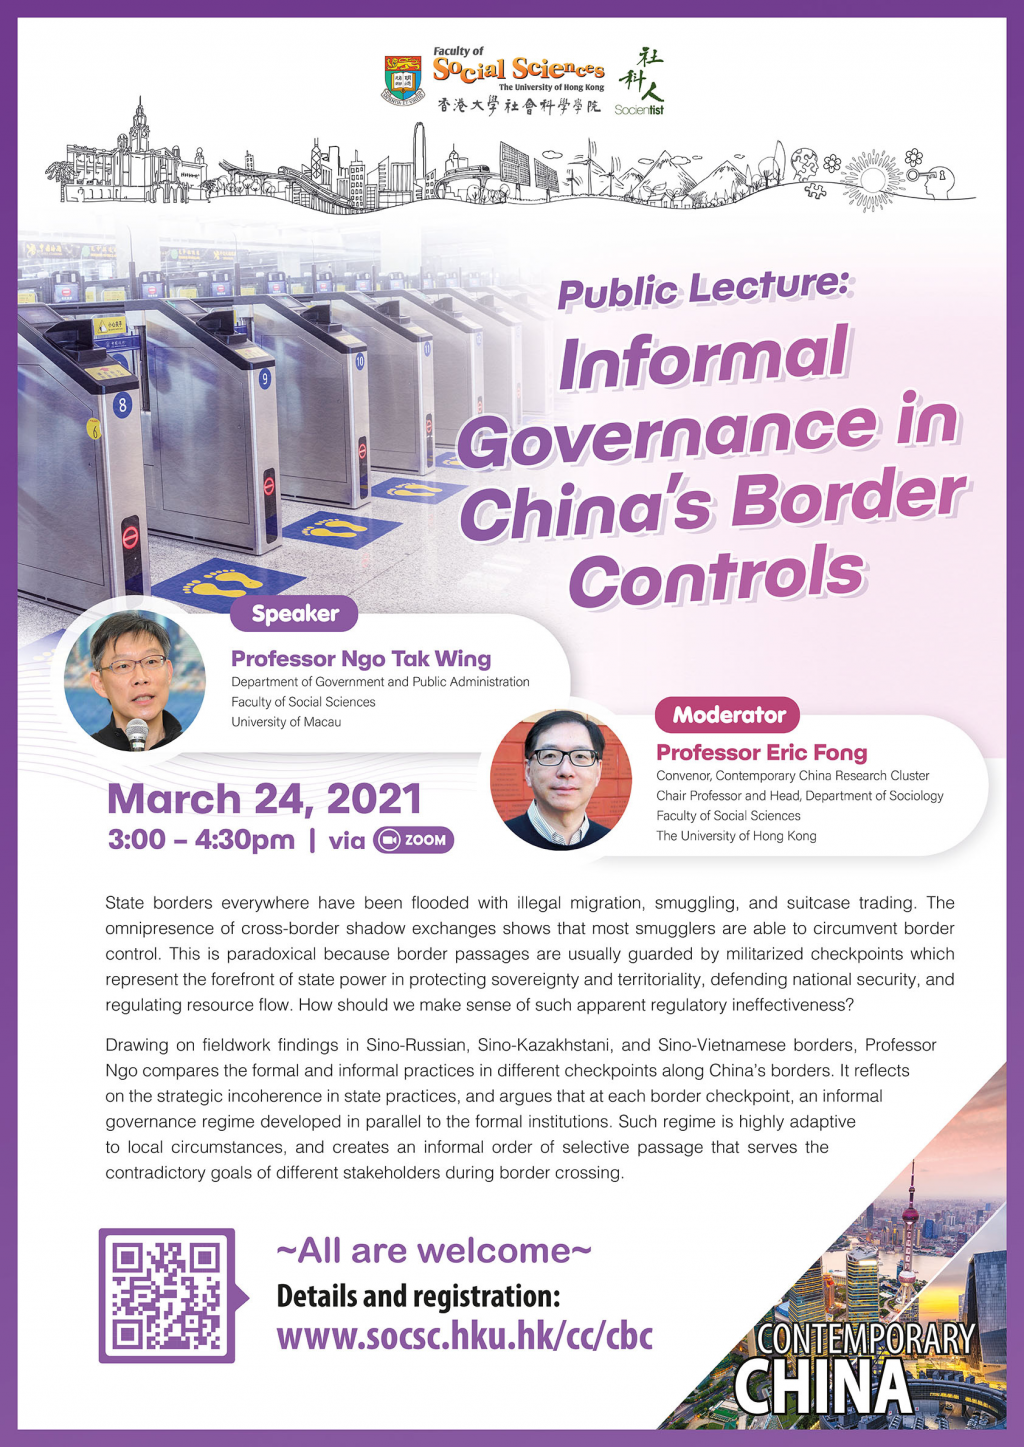 Contemporary China Research Cluster Public Lecture: Informal Governance in China's Border Controls (March 24, 3pm)